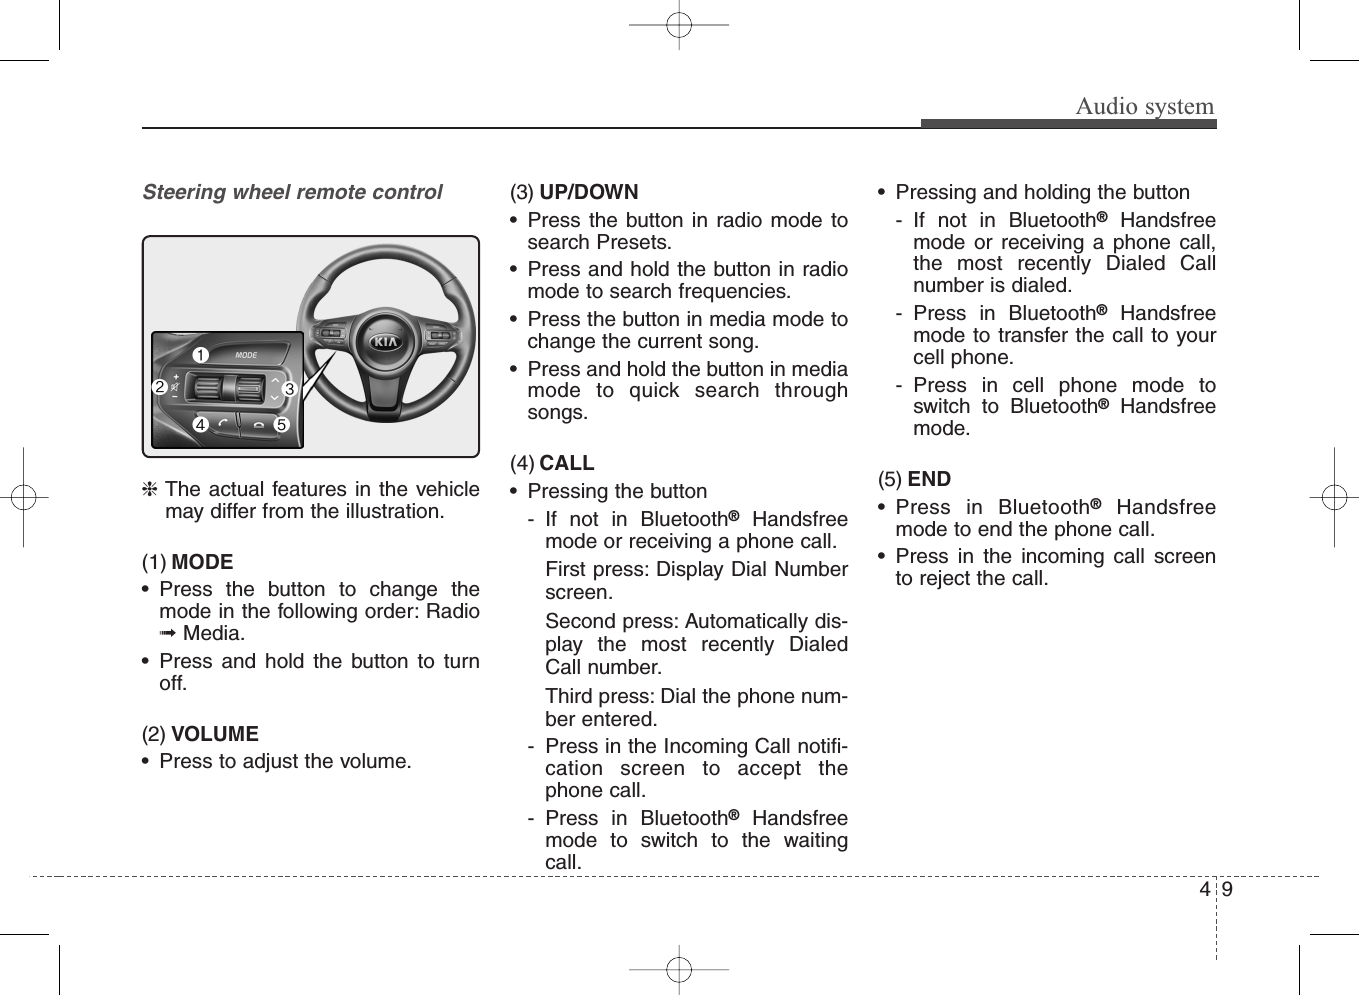 Audio system94Steering wheel remote control❈The actual features in the vehiclemay differ from the illustration.(1) MODE• Press the button to change themode in the following order: Radio➟Media.• Press and hold the button to turnoff.(2) VOLUME• Press to adjust the volume.(3) UP/DOWN• Press the button in radio mode tosearch Presets.• Press and hold the button in radiomode to search frequencies.• Press the button in media mode tochange the current song.• Press and hold the button in mediamode to quick search throughsongs.(4) CALL• Pressing the button- If not in Bluetooth®Handsfreemode or receiving a phone call.First press: Display Dial Numberscreen.Second press: Automatically dis-play the most recently DialedCall number.Third press: Dial the phone num-ber entered.- Press in the Incoming Call notifi-cation screen to accept thephone call.- Press in Bluetooth®Handsfreemode to switch to the waitingcall.• Pressing and holding the button- If not in Bluetooth®Handsfreemode or receiving a phone call,the most recently Dialed Callnumber is dialed.- Press in Bluetooth®Handsfreemode to transfer the call to yourcell phone.- Press in cell phone mode toswitch to Bluetooth®Handsfreemode.(5) END• Press in Bluetooth®Handsfreemode to end the phone call.• Press in the incoming call screento reject the call.